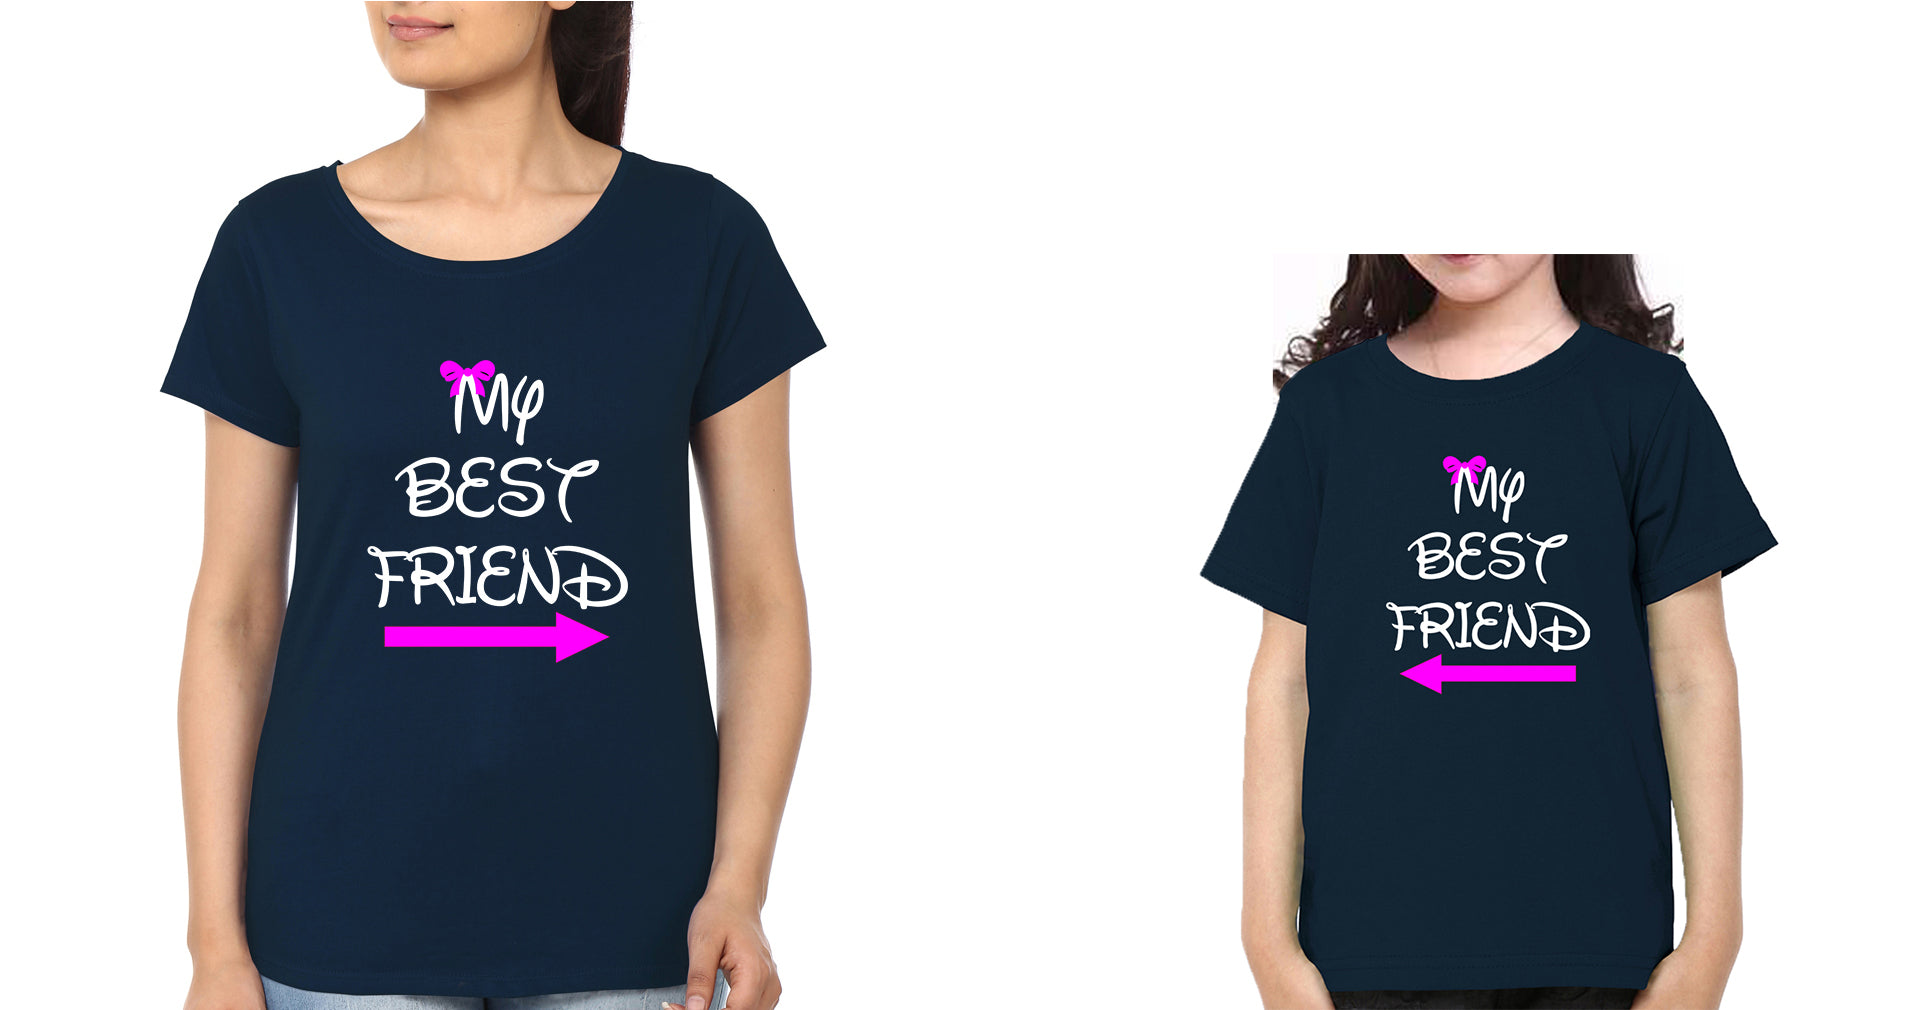 My Best Friend Mother and Daughter Matching T-Shirt- FunkyTradition